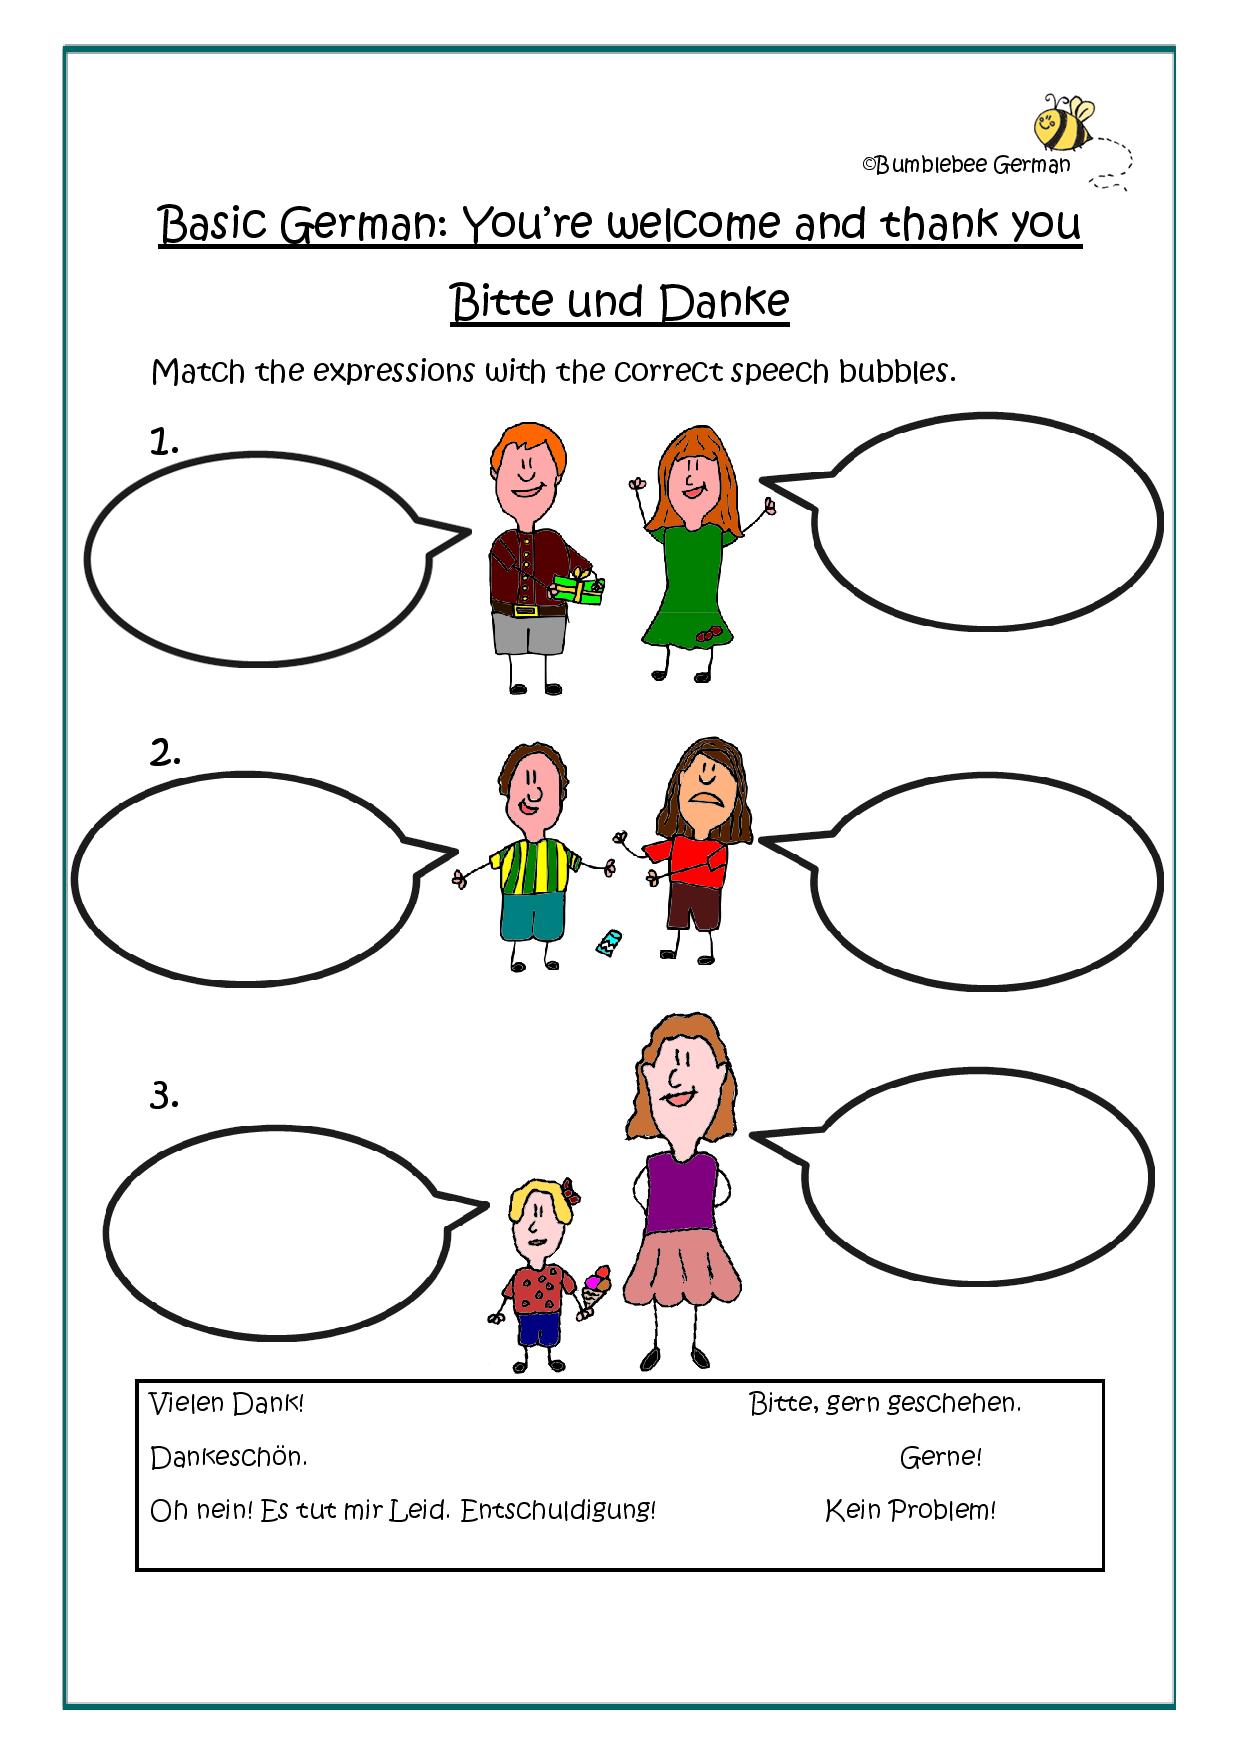 German worksheets for kids: You’re welcome and thank you / Bitte und Danke

This is a very quick exercise but it should shed light onto a couple of phrases/expression which don’t… Continue